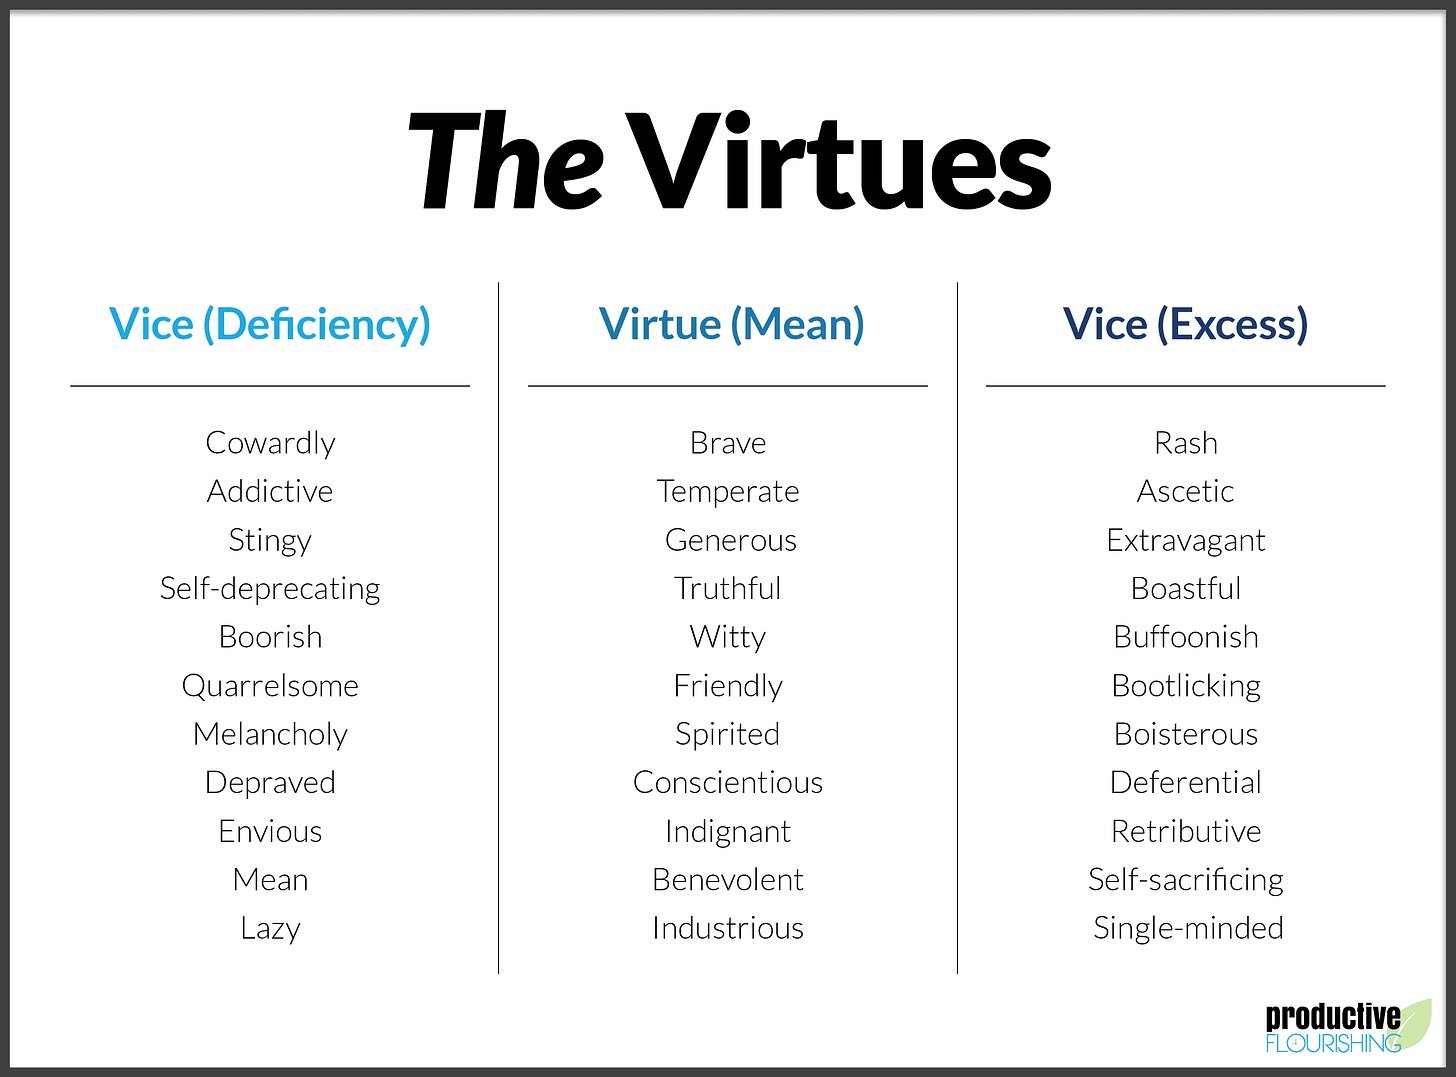 Simple table of three columns that lists the specific virtues related to deficiency, mean, and excess. There are 11 traits in each column.